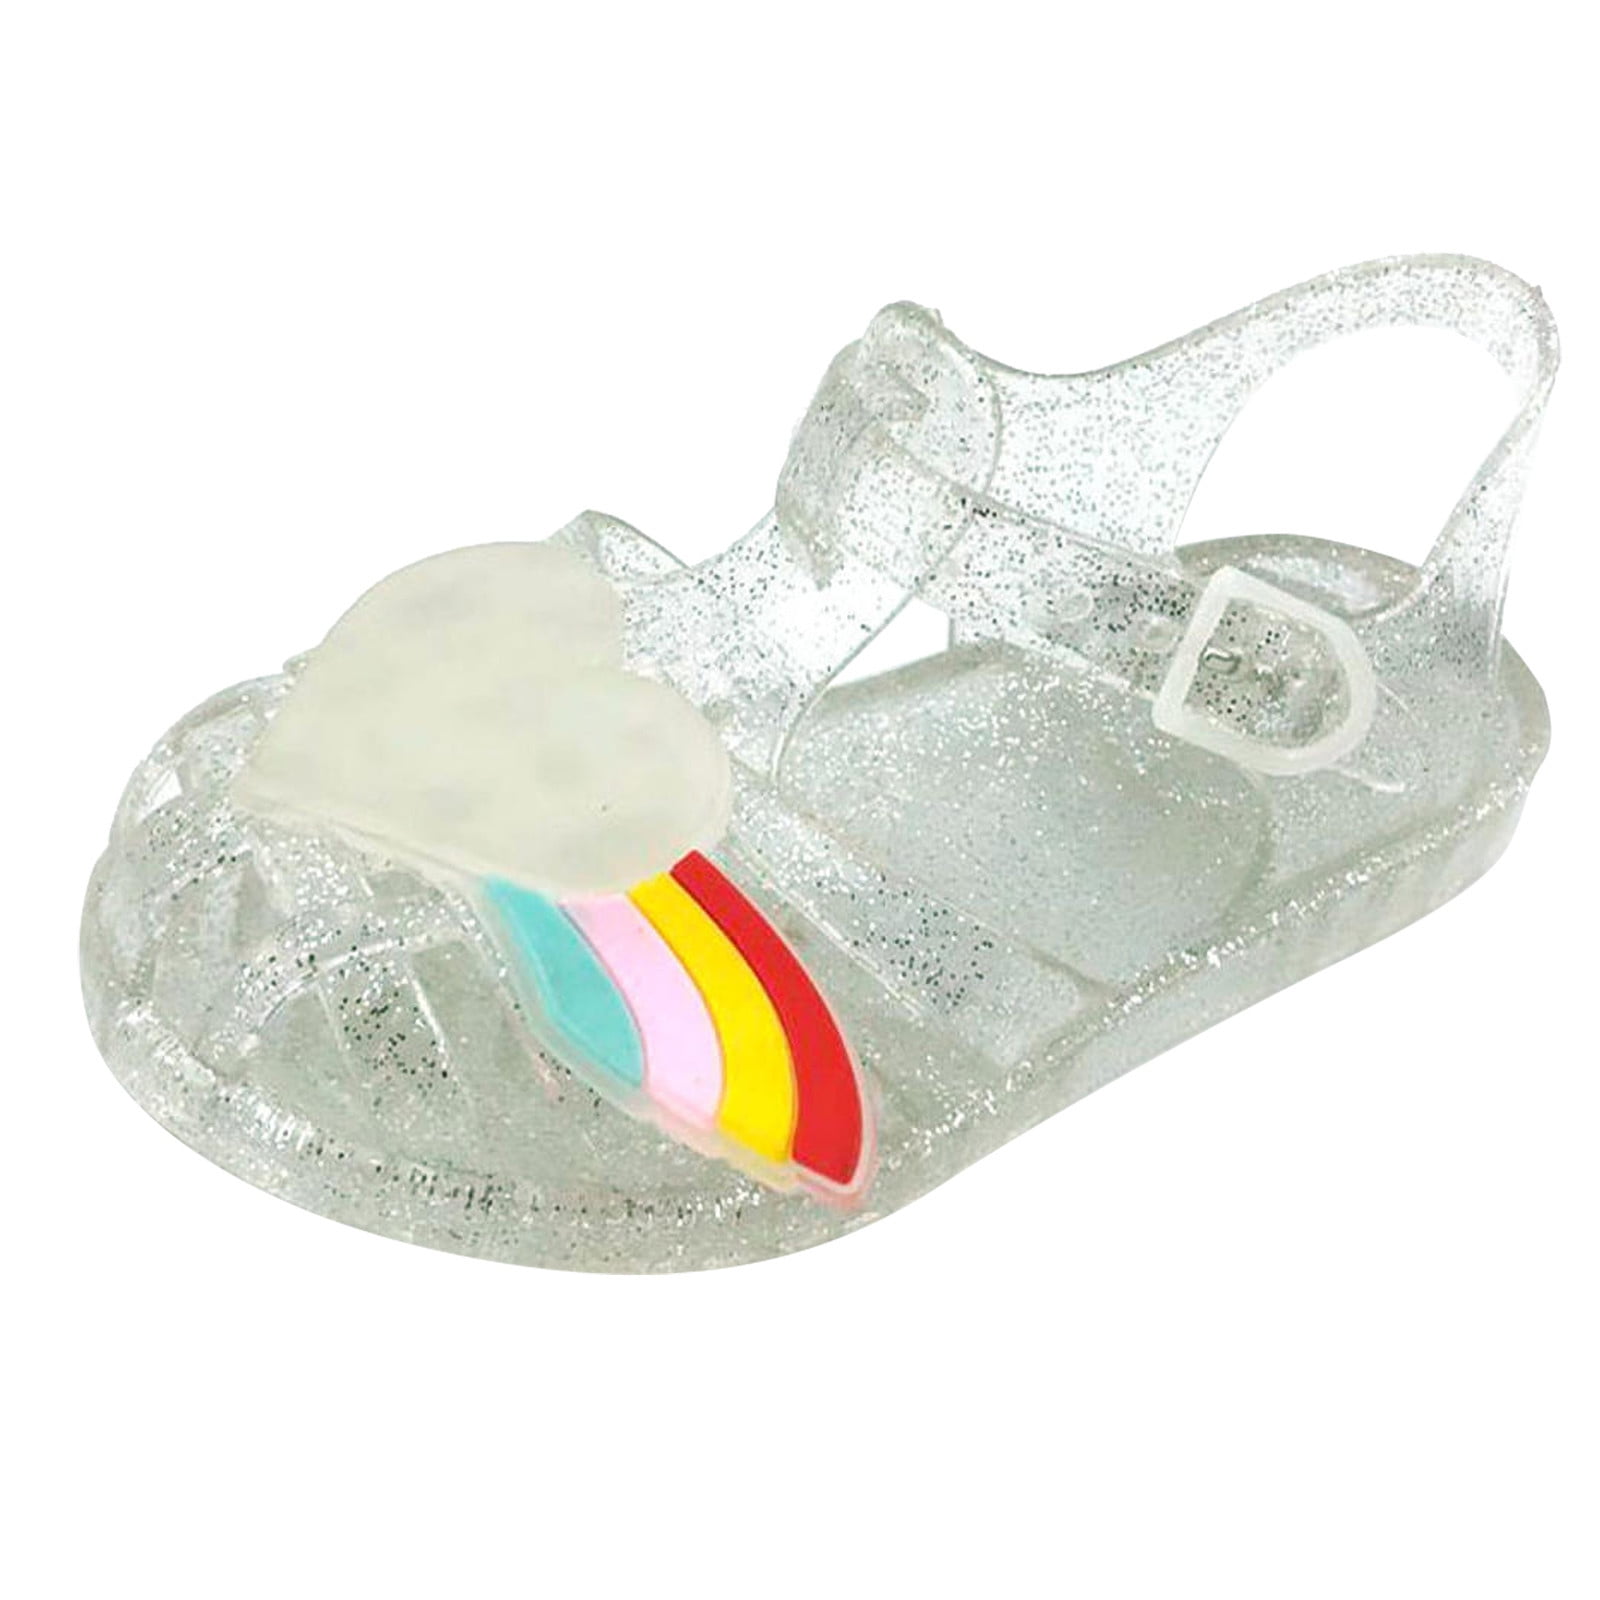 Lovskoo Little Girls Jelly Sandal for 9-10 Years Old Hollow Out Non-slip  Cute Fruit Soft Sole Beach Roman Sandals White 